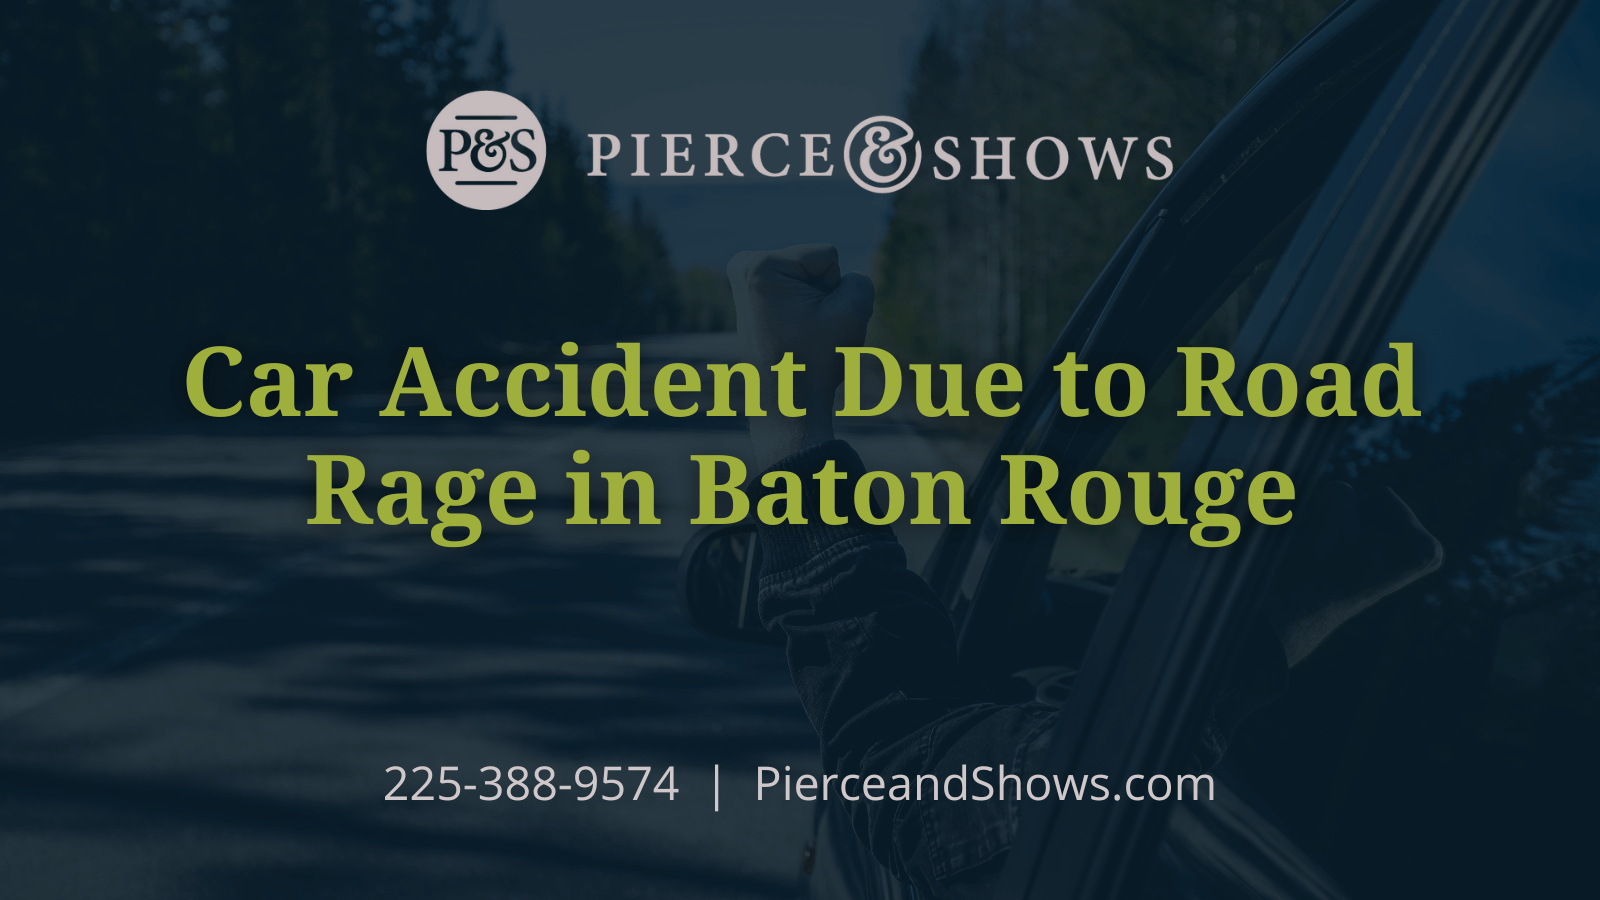 Car Accident Due to Road Rage in Baton Rouge - Baton Rouge Louisiana injury attorney Pierce & Shows